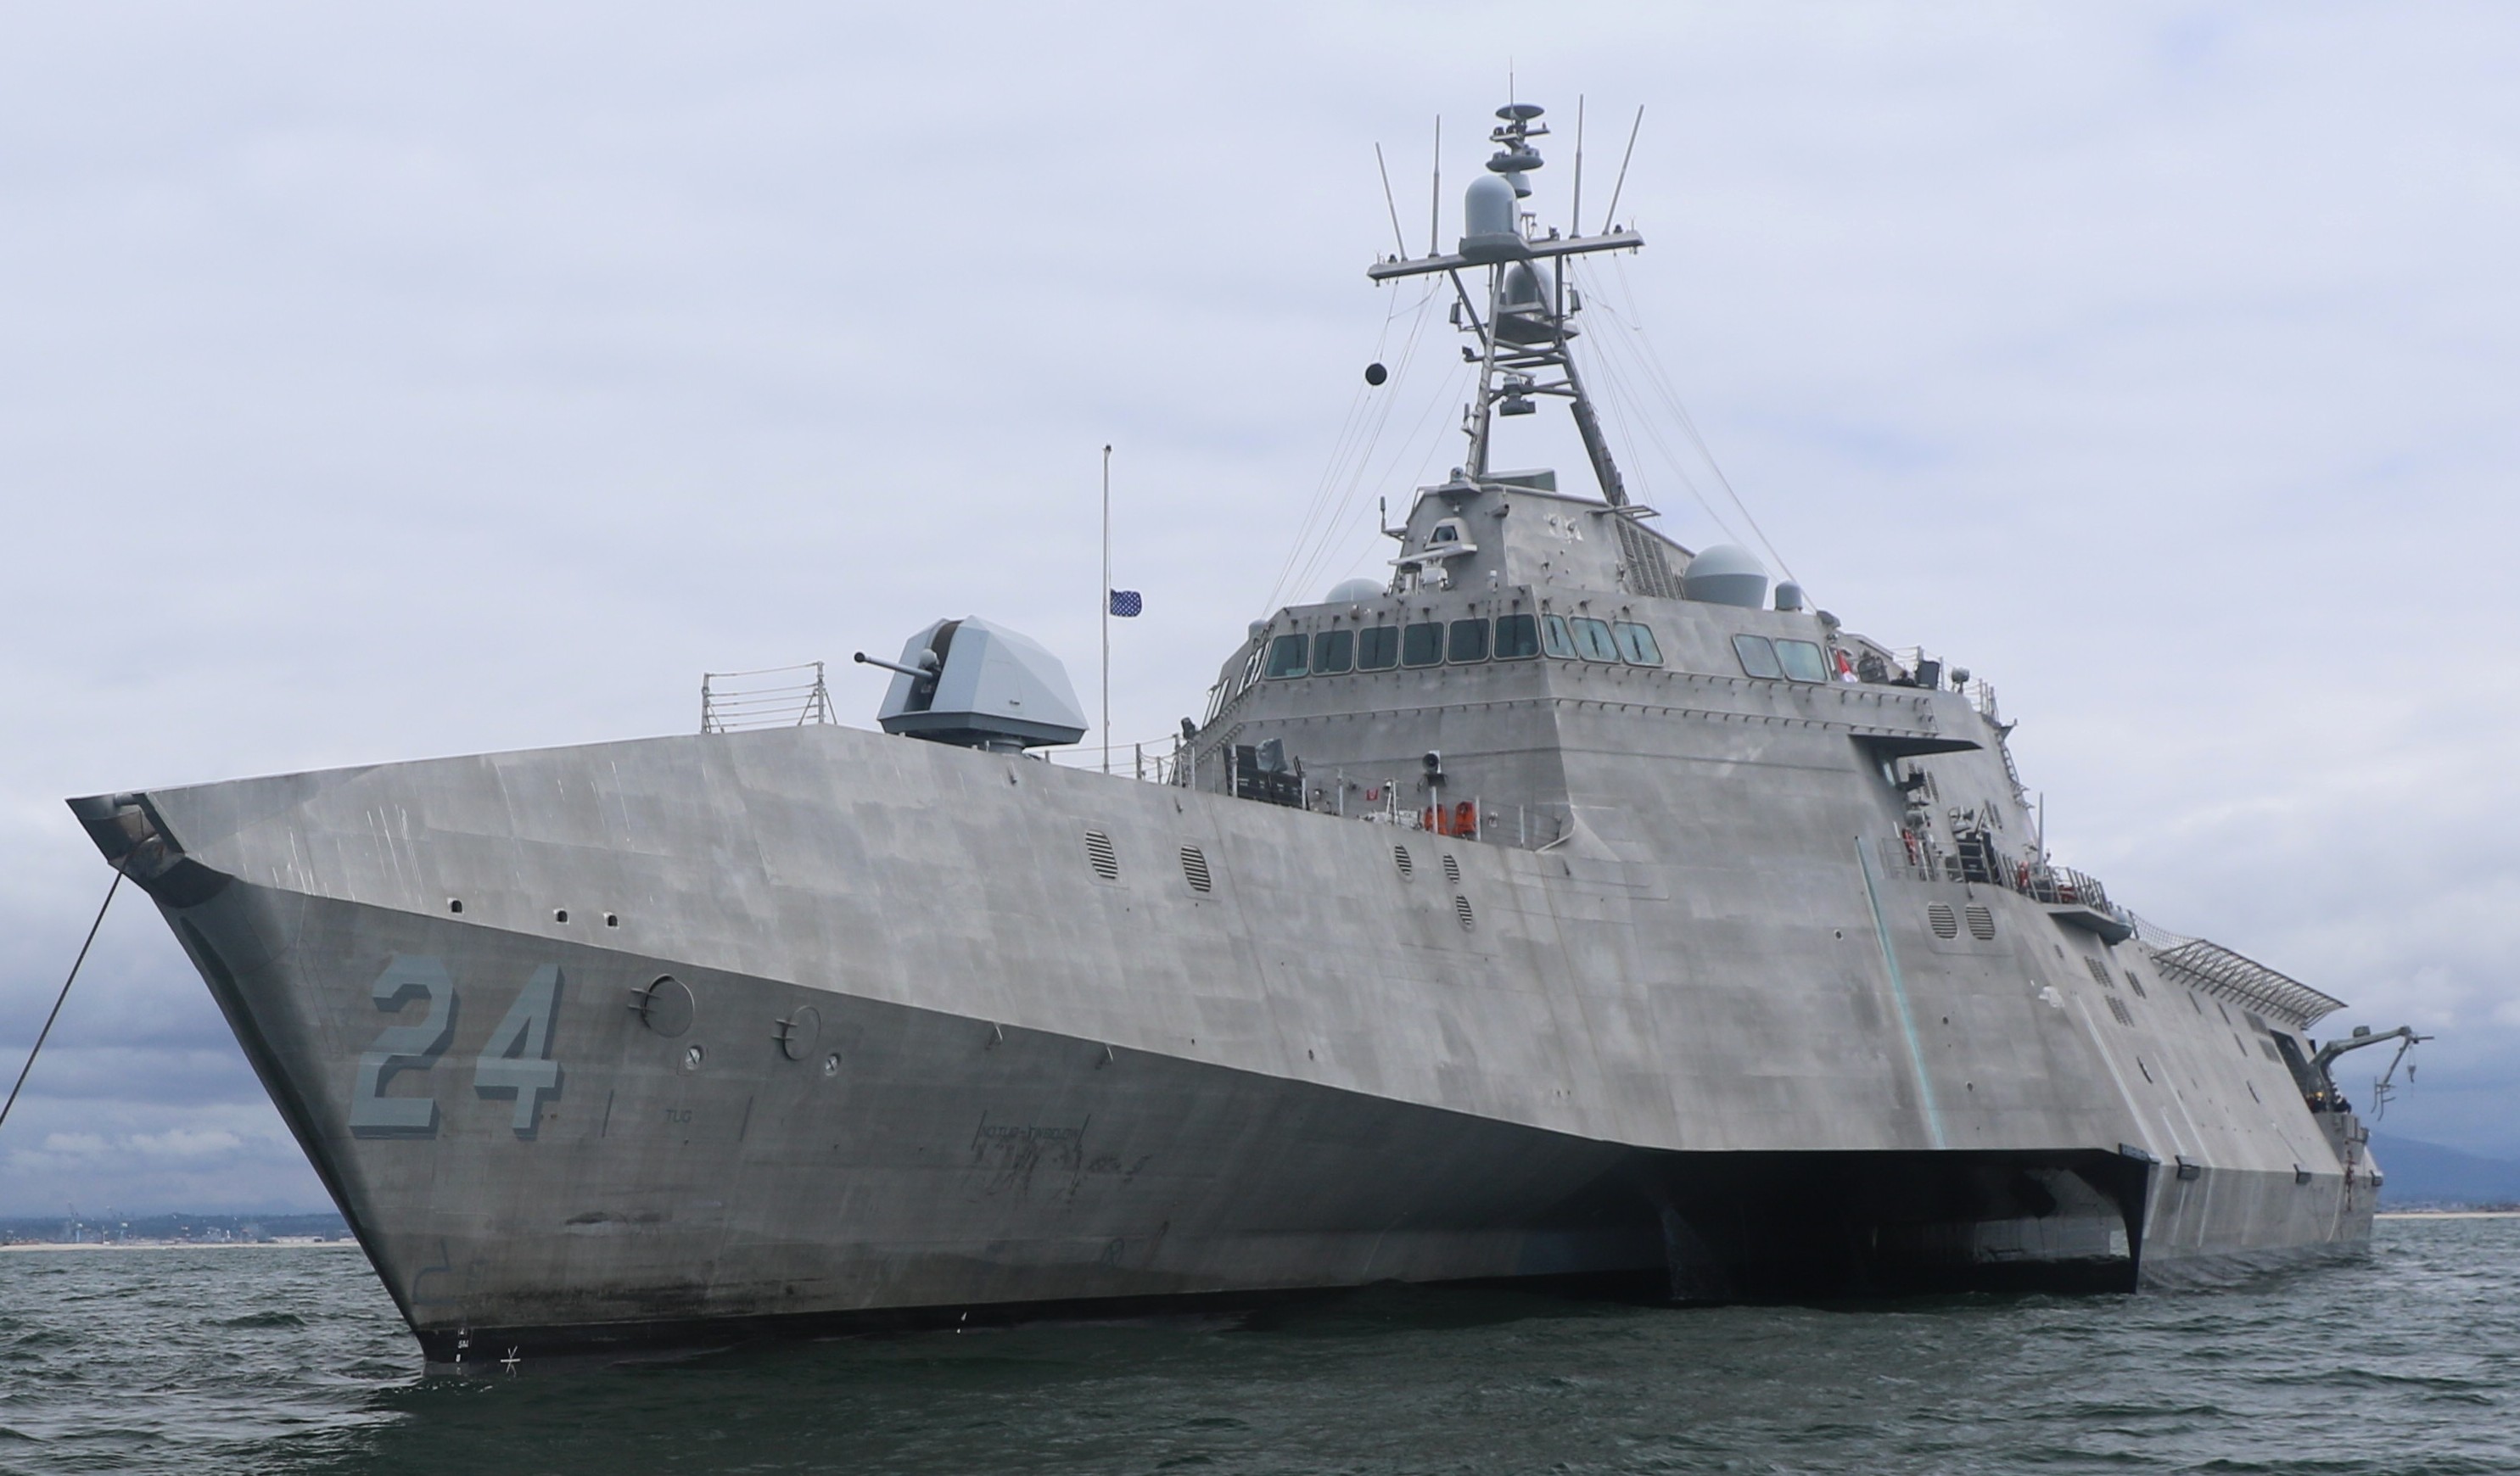 lcs-24 uss oakland independence class littoral combat ship us navy 12